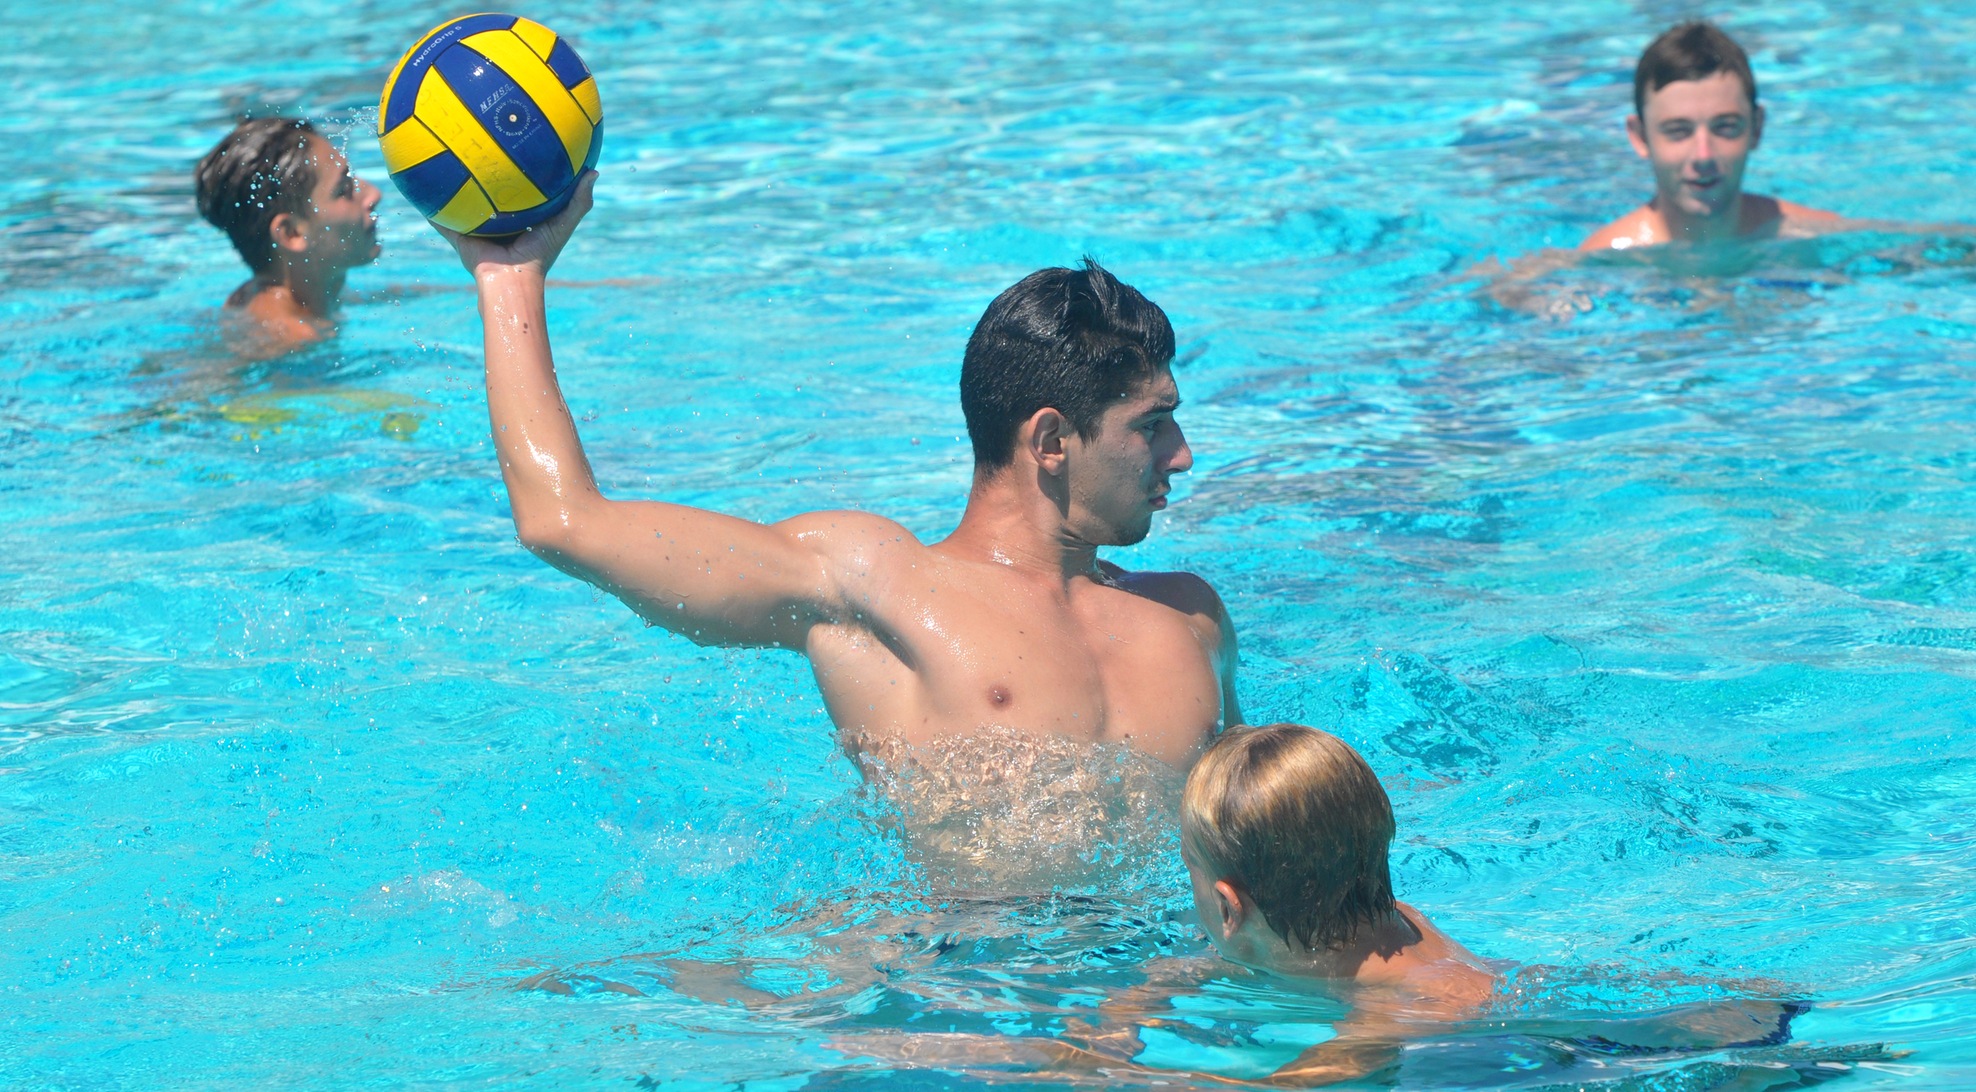 Men's Water Polo game change update